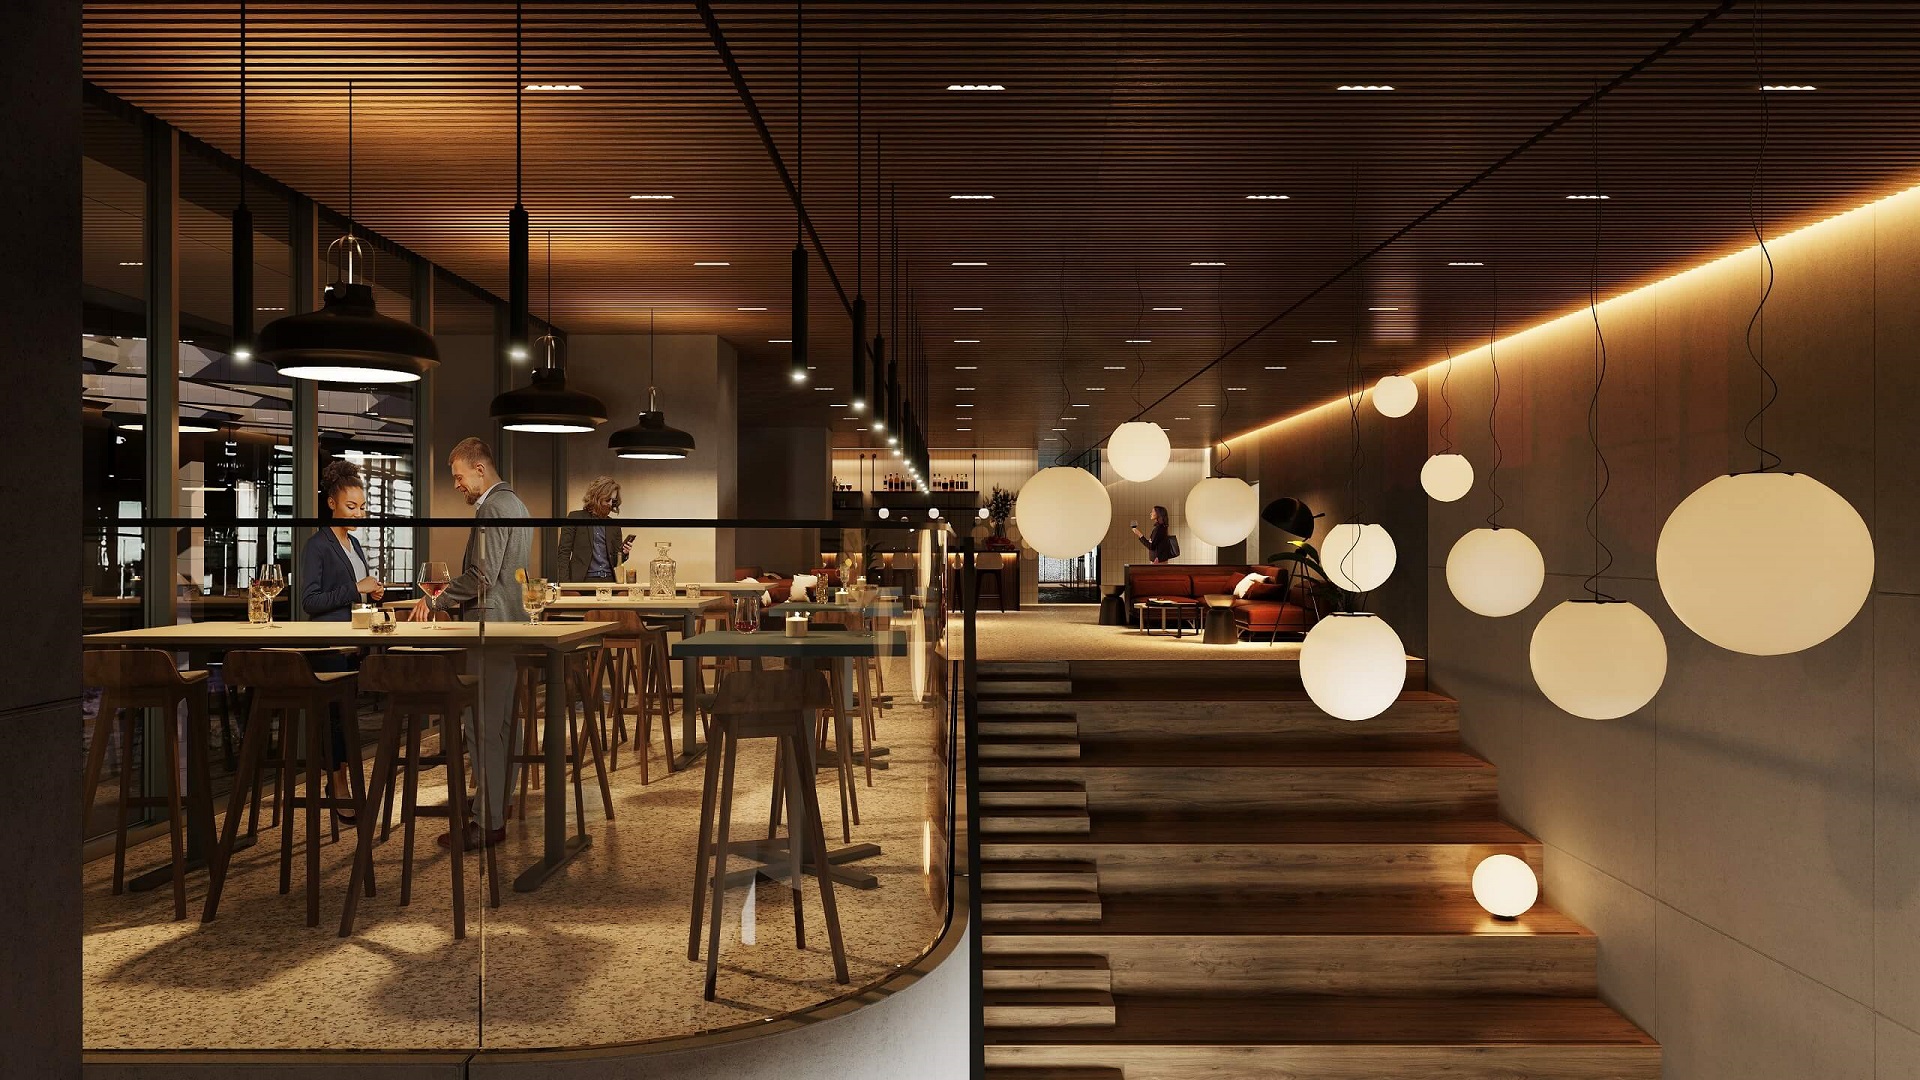 3D Rendering of a Cafe with People